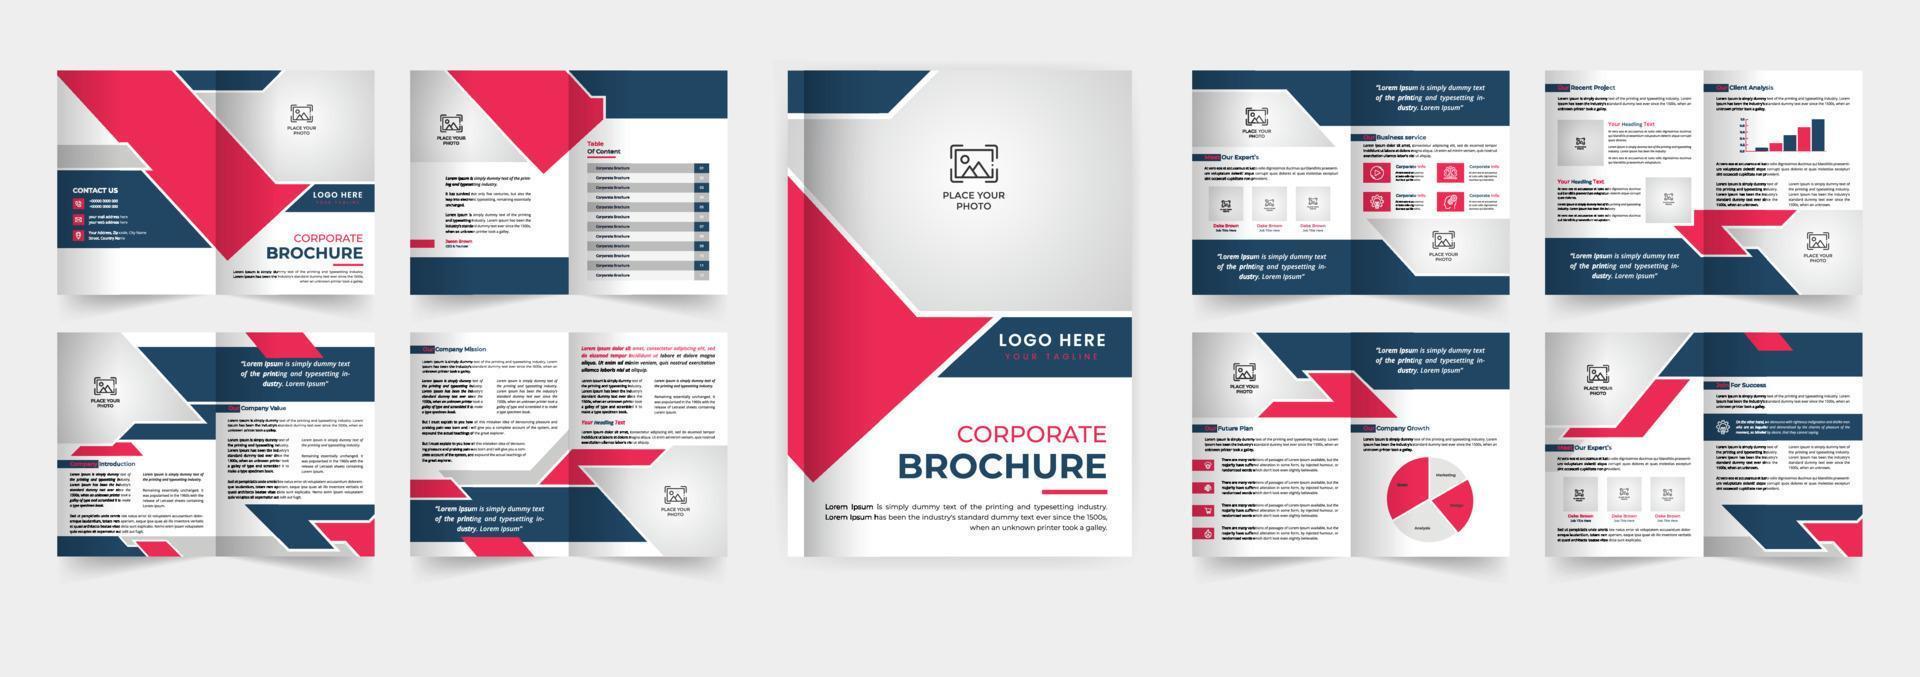 16 Pages corporate brochure template design vector